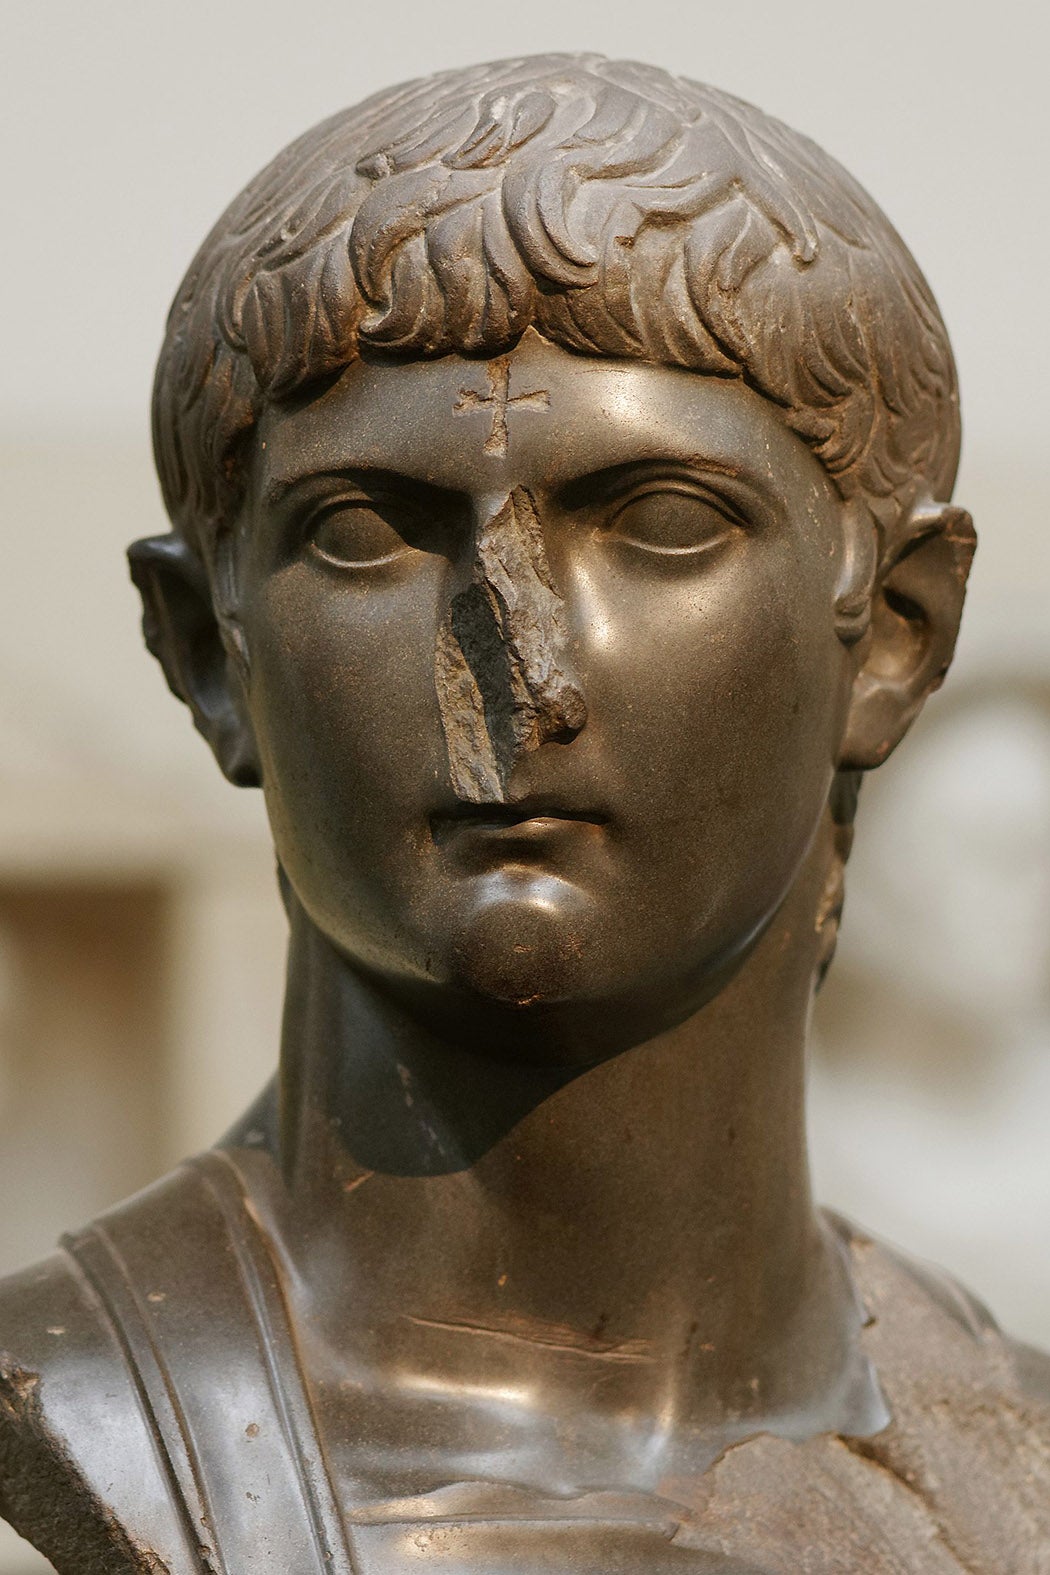 Bust of Germanicus in military dress. The nose has been broken and a cross carved on the forehead by Christians in late antiquity.